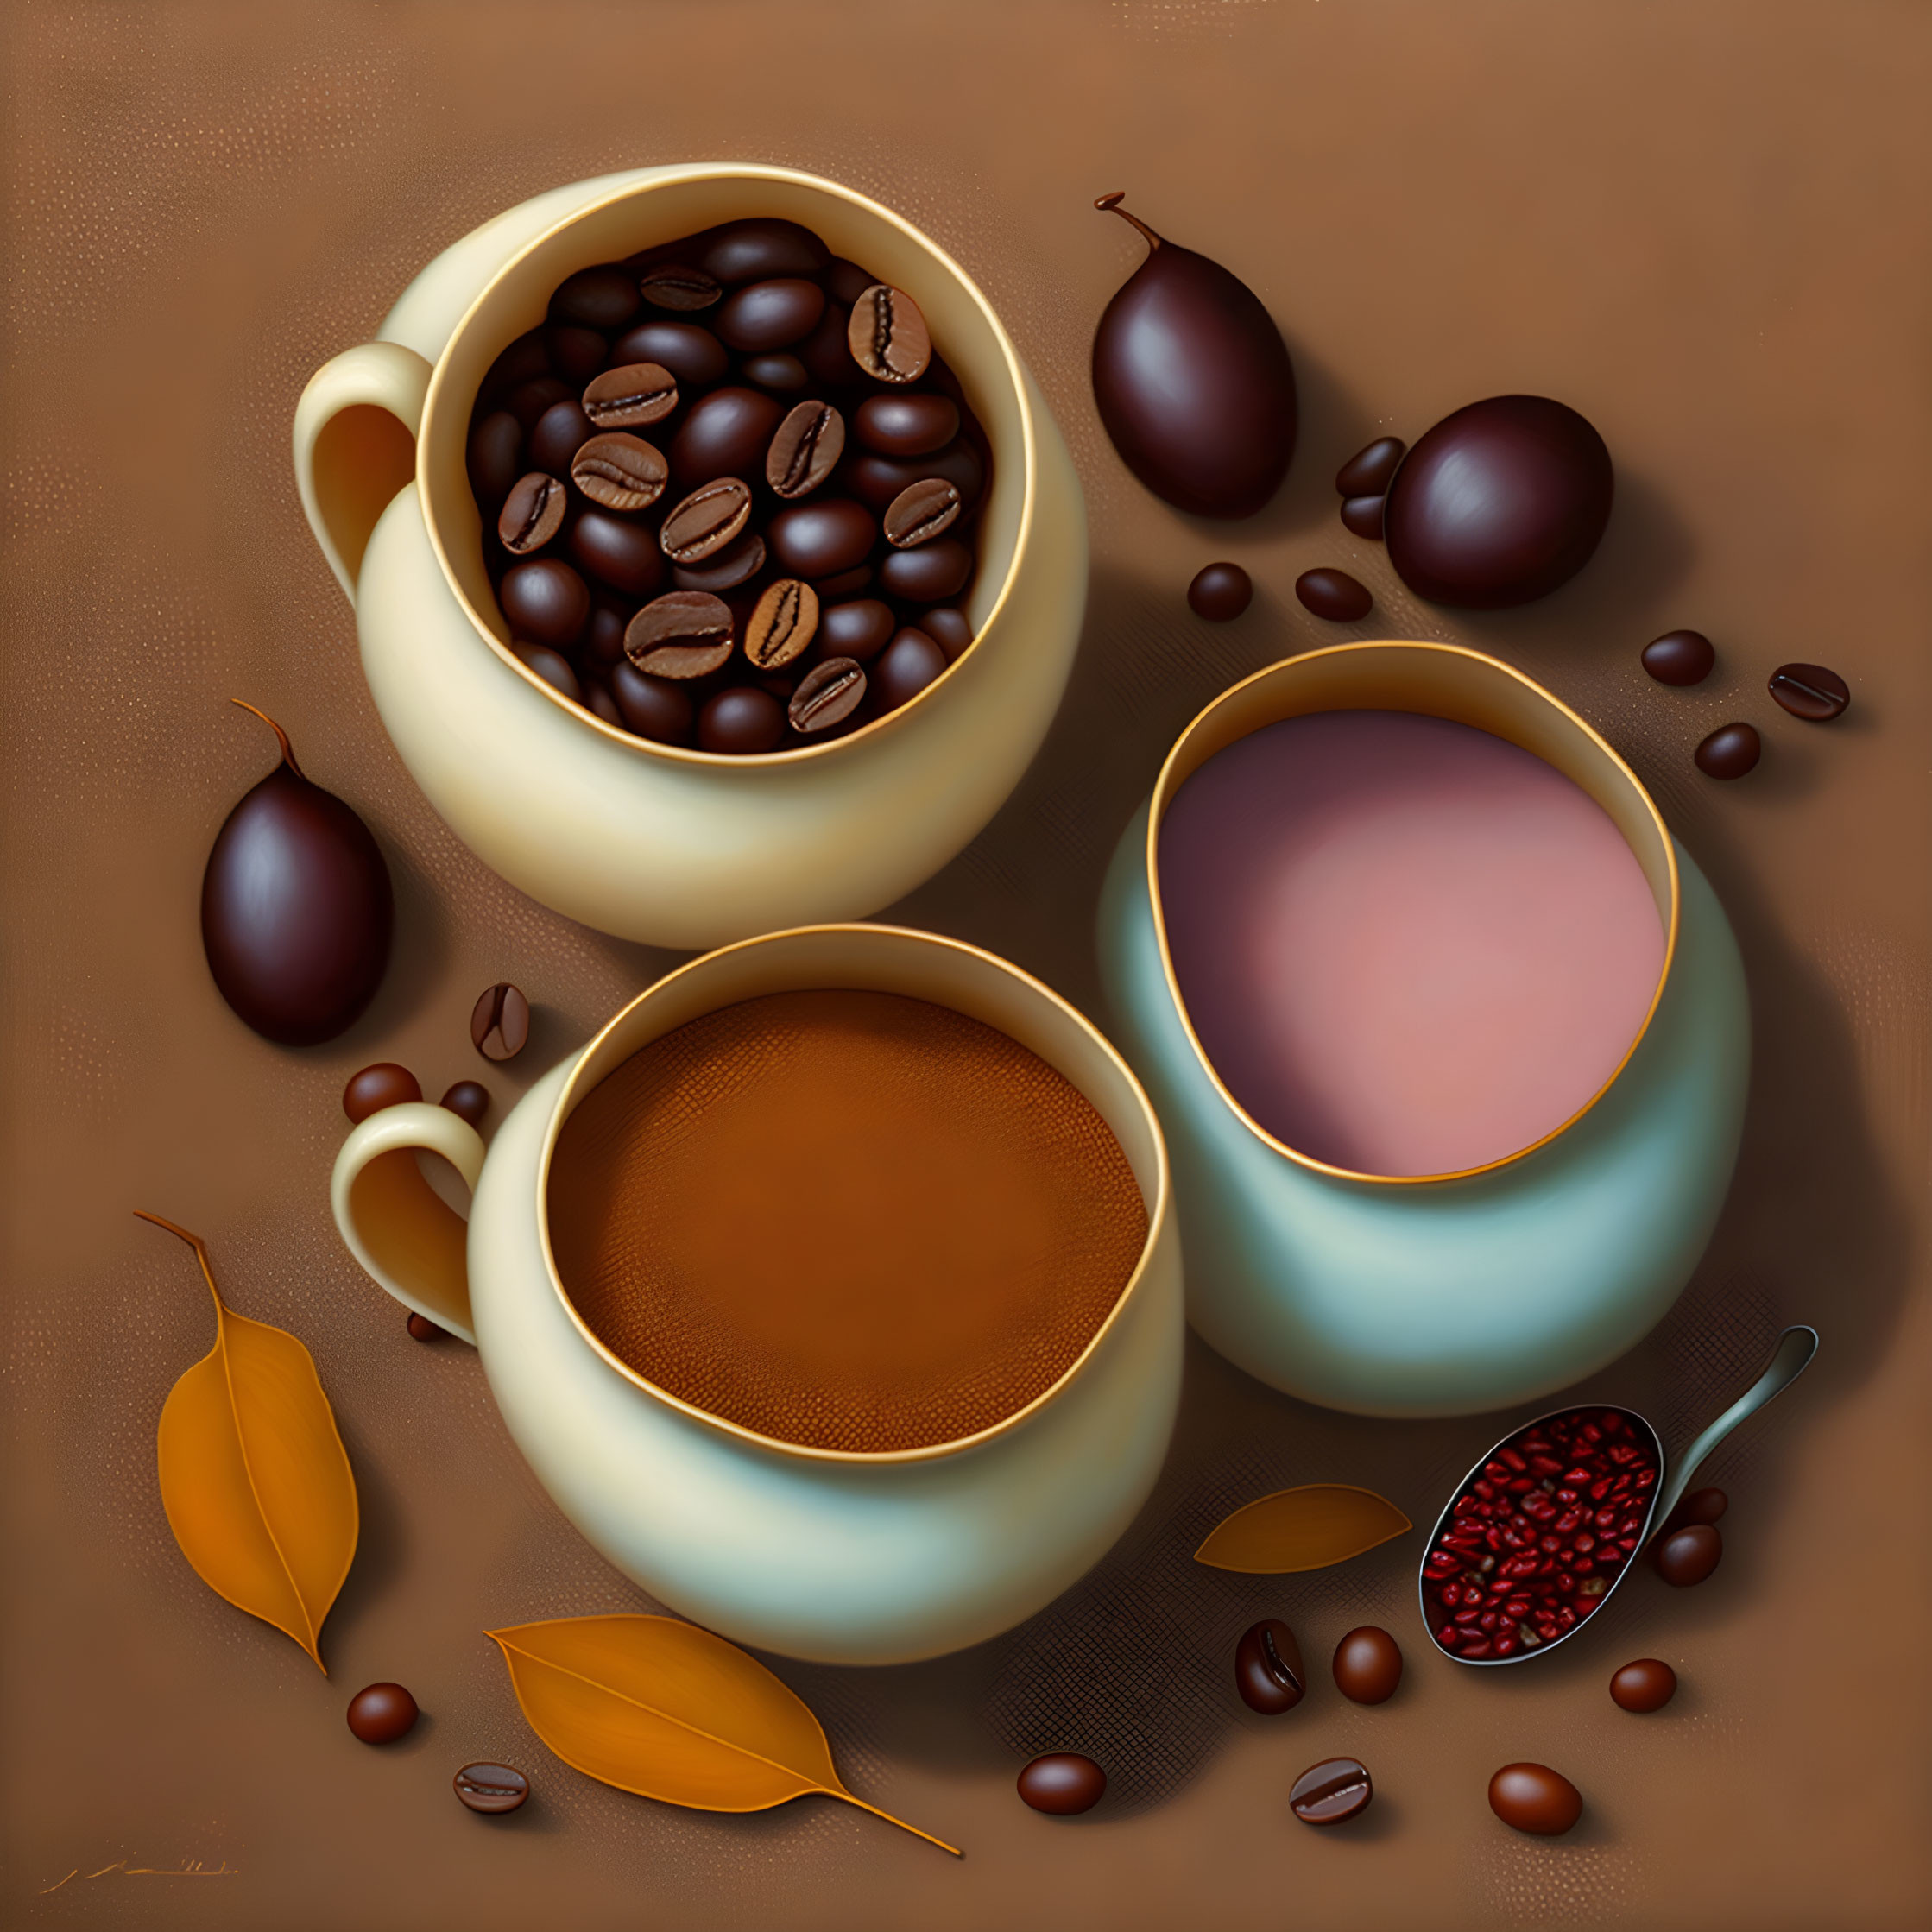 Coffee-themed still life composition with cups, beans, leaves, and berries on brown background